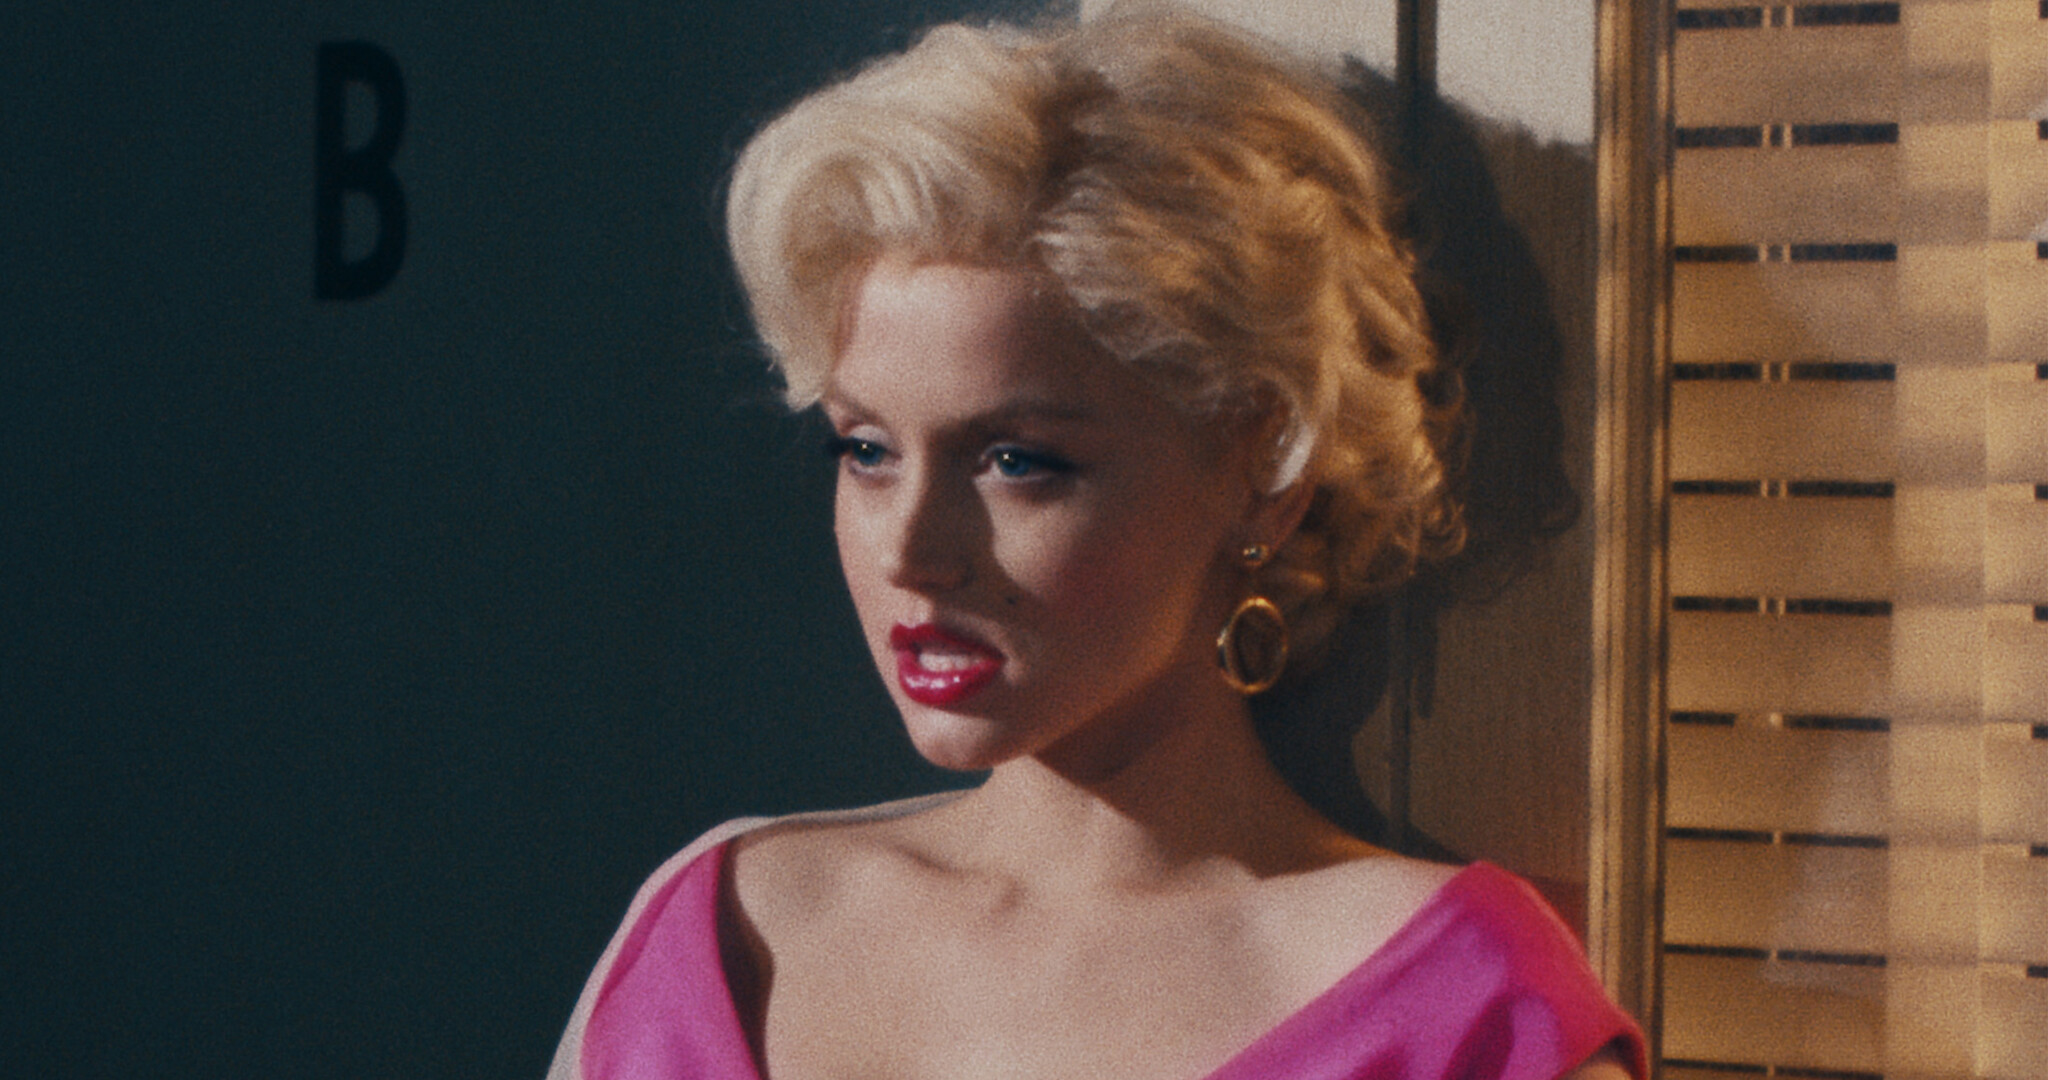 Who Stars In Blonde Marilyn Monroe Movie With Ana de Armas? Adult Picture